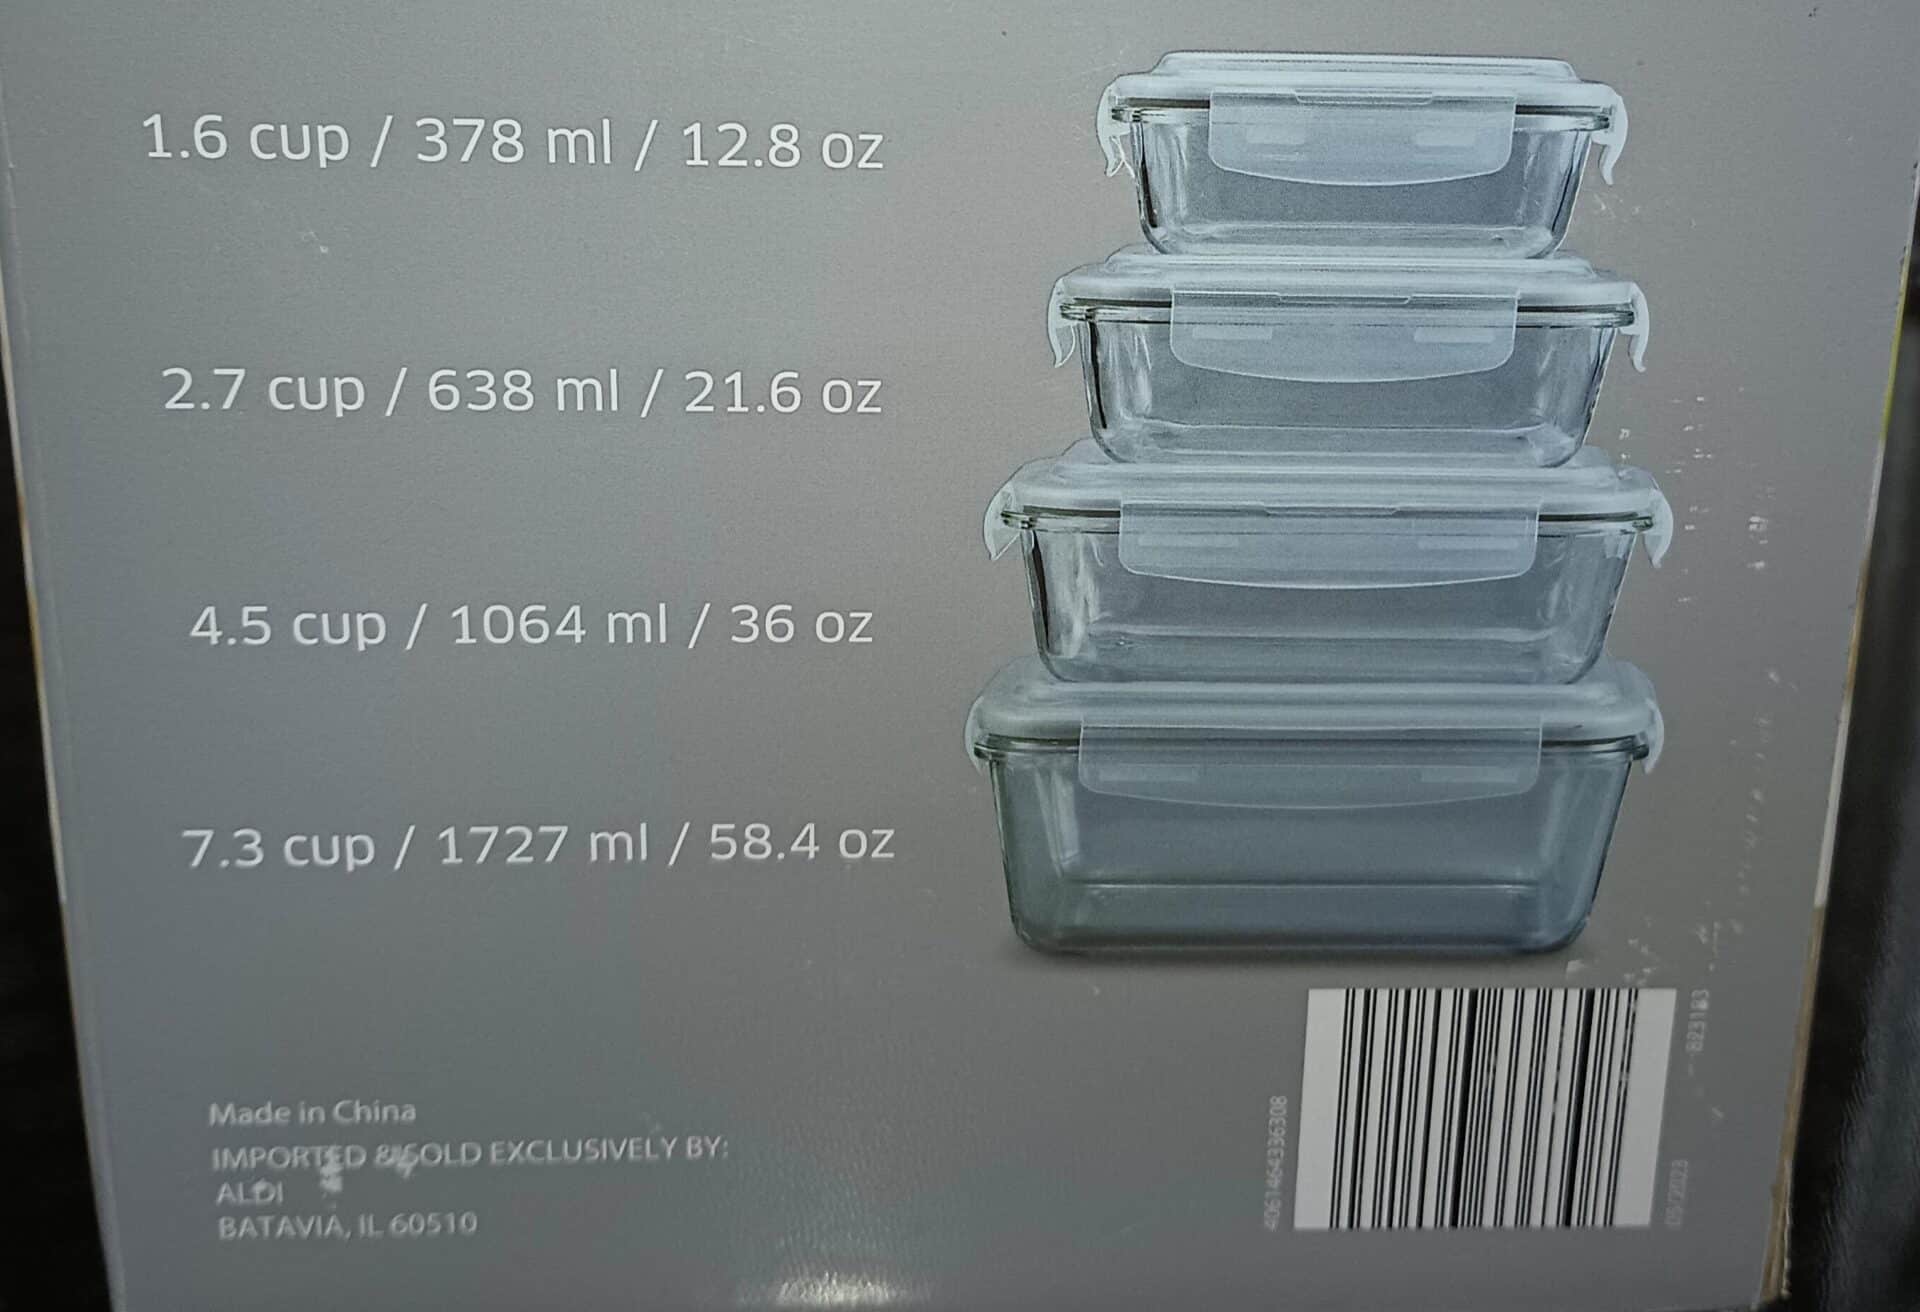 Has anyone bought Crofton storage containers? Do they hold up in  dishwasher? Melting, turning yellow, etc. : r/aldi